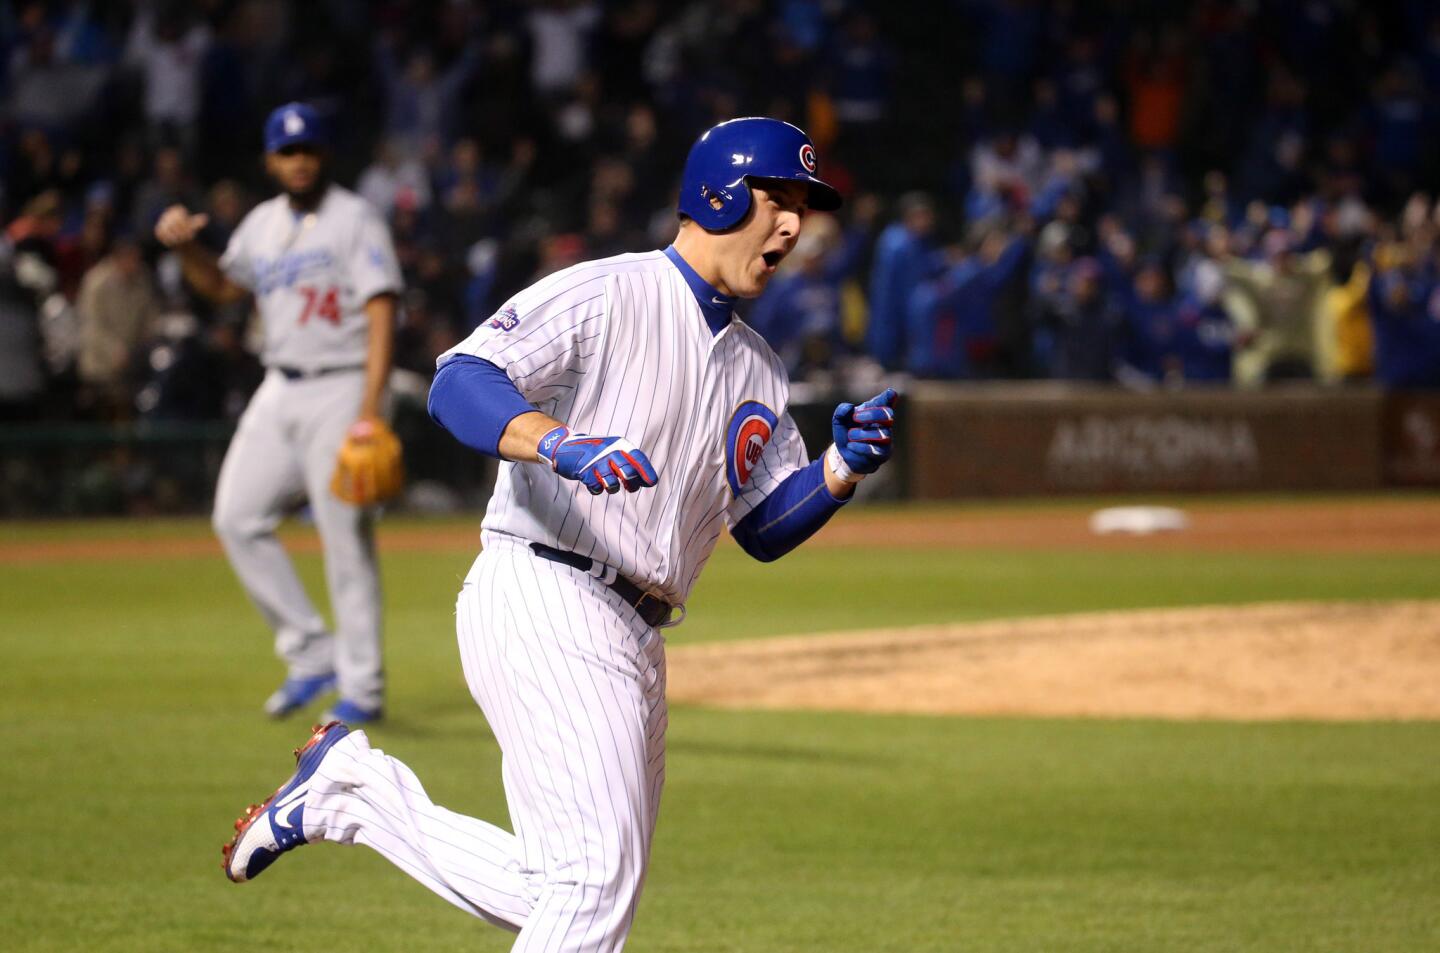 Cubs first baseman Anthony Rizzo celebrates his game-winning hit in the ninth inning.